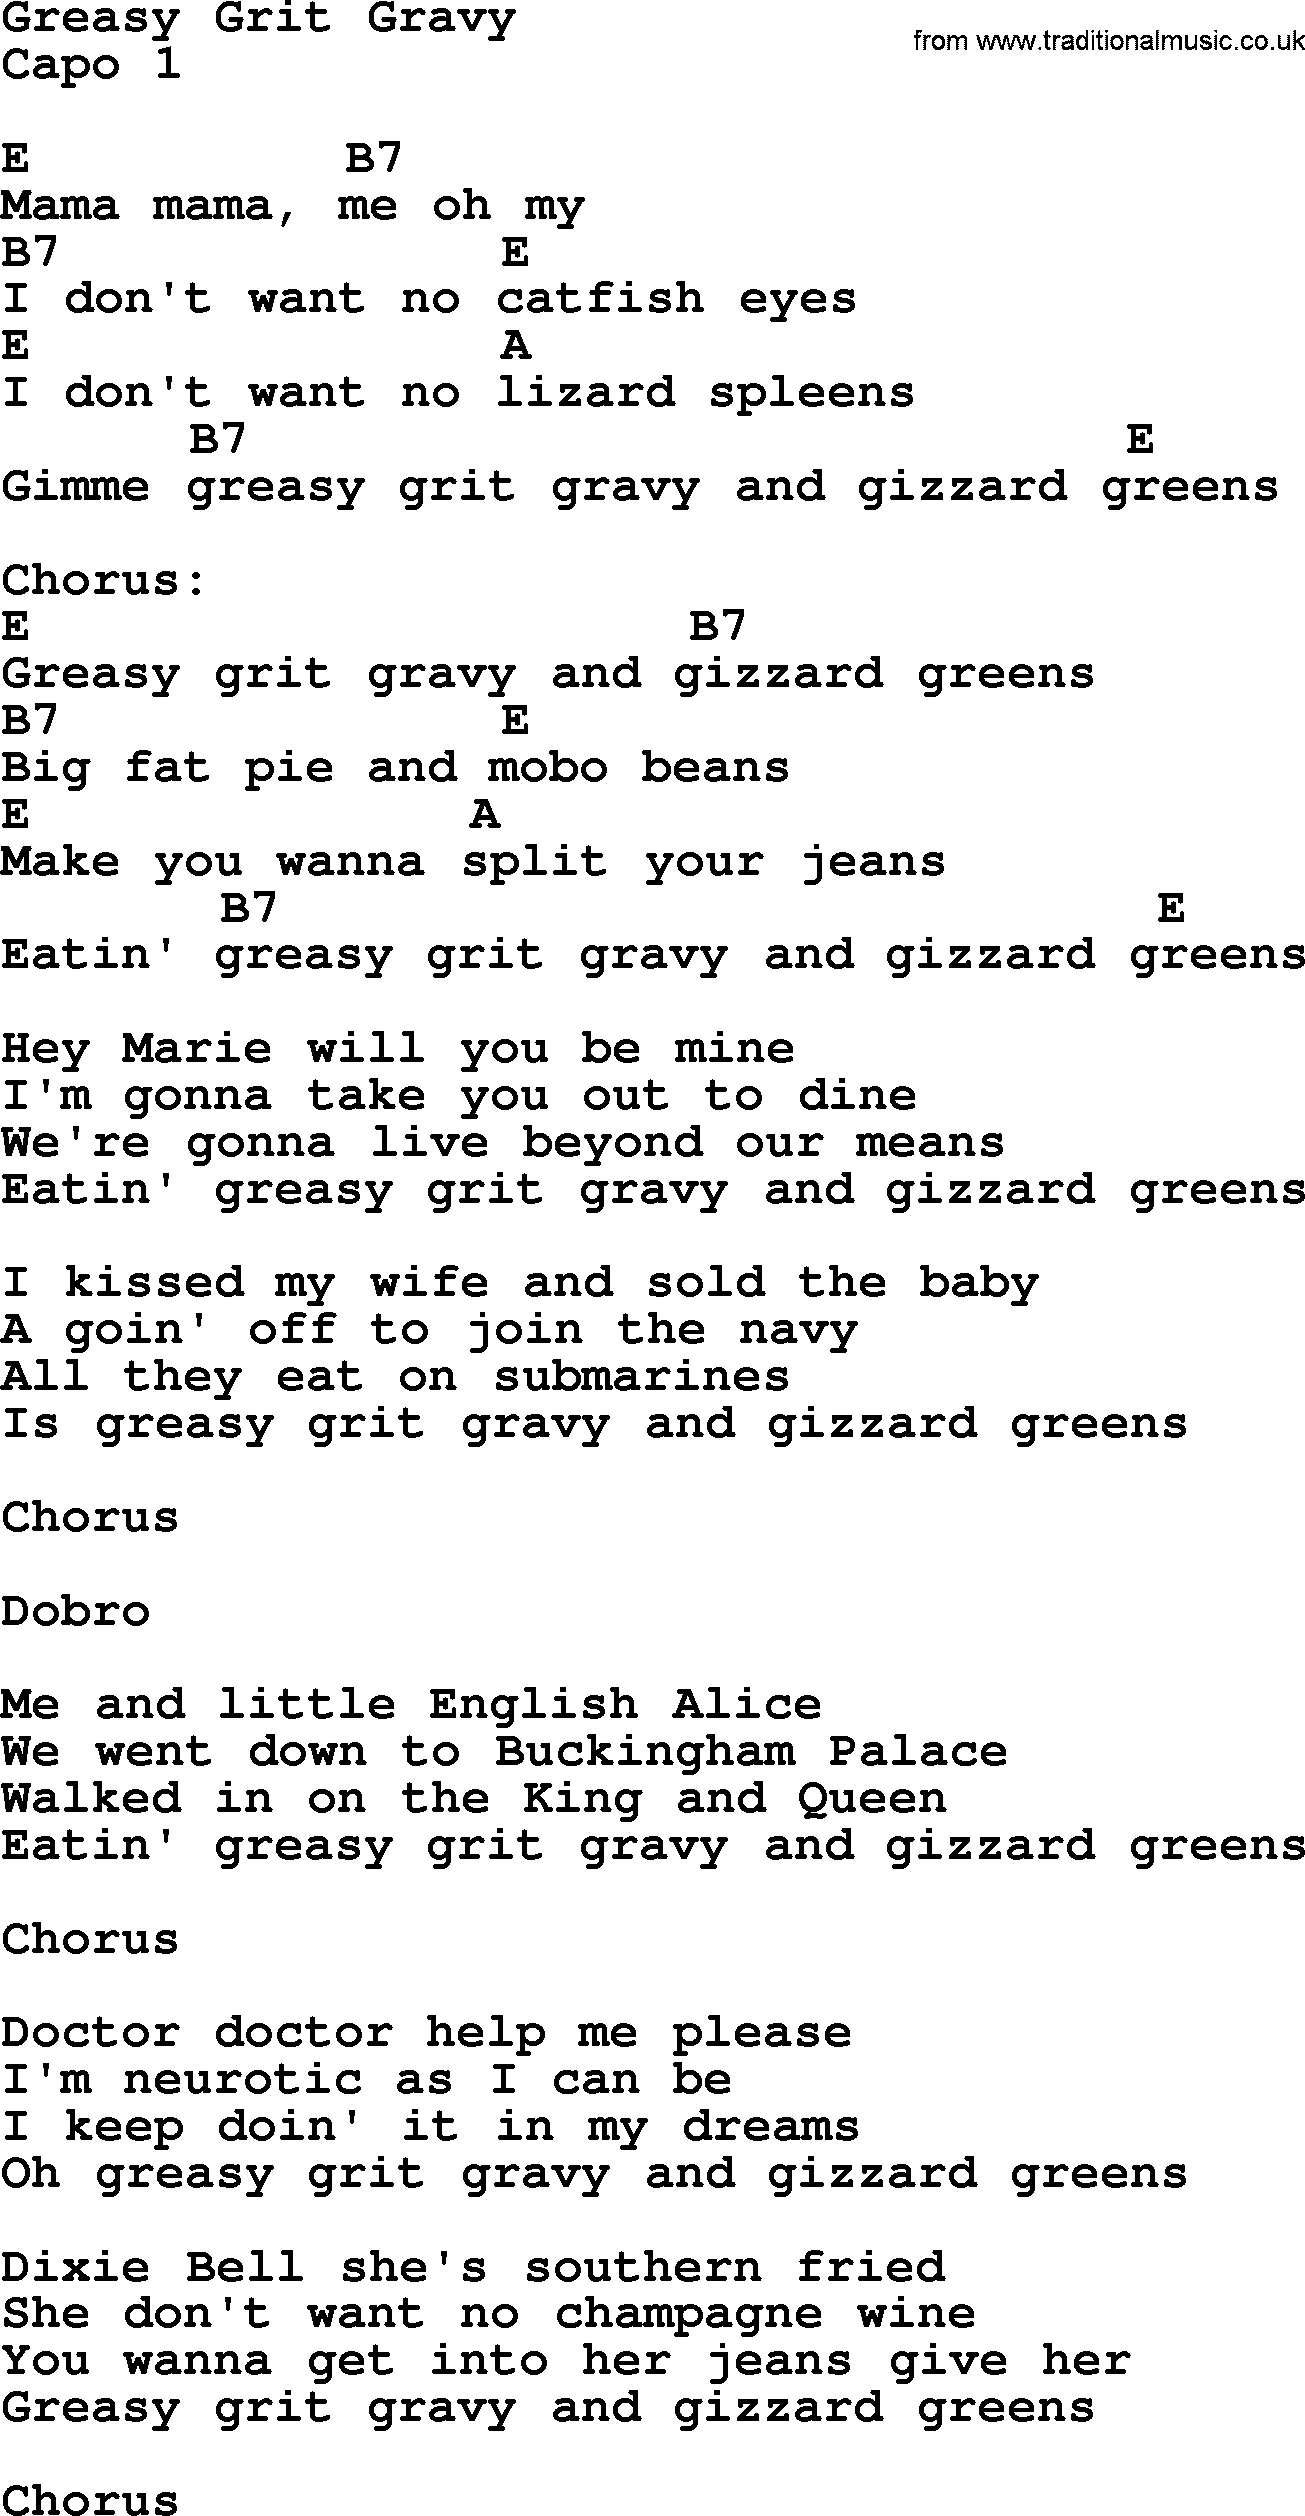 Bluegrass song: Greasy Grit Gravy, lyrics and chords